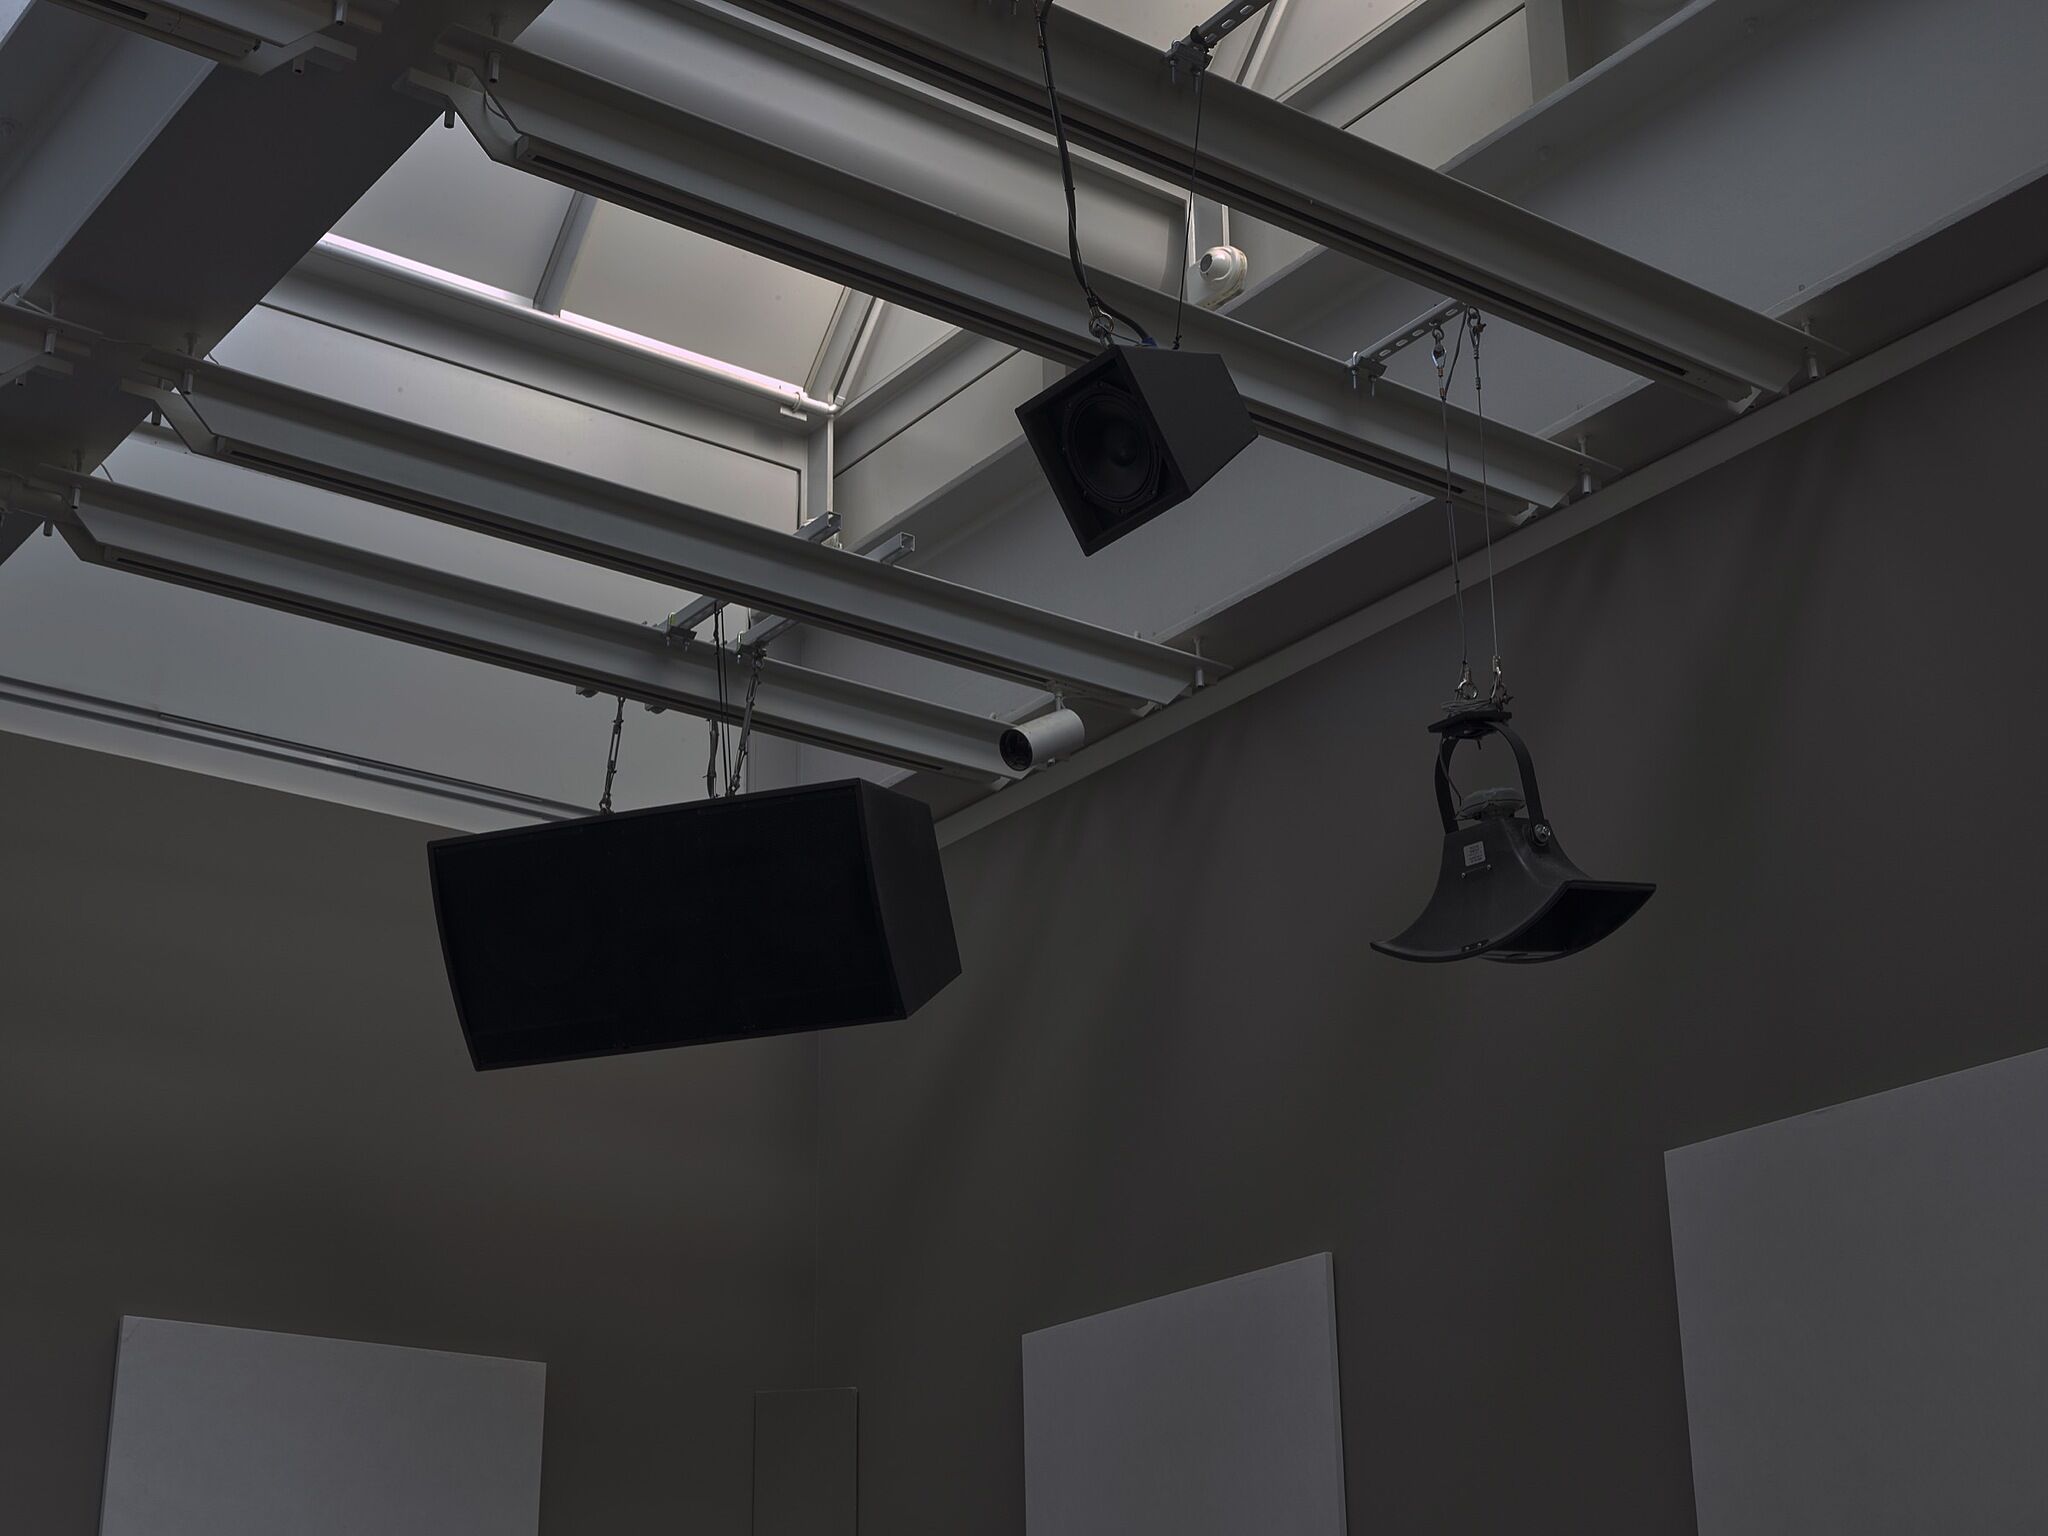 Speakers hanging from the ceiling of a dimly lit gallery.